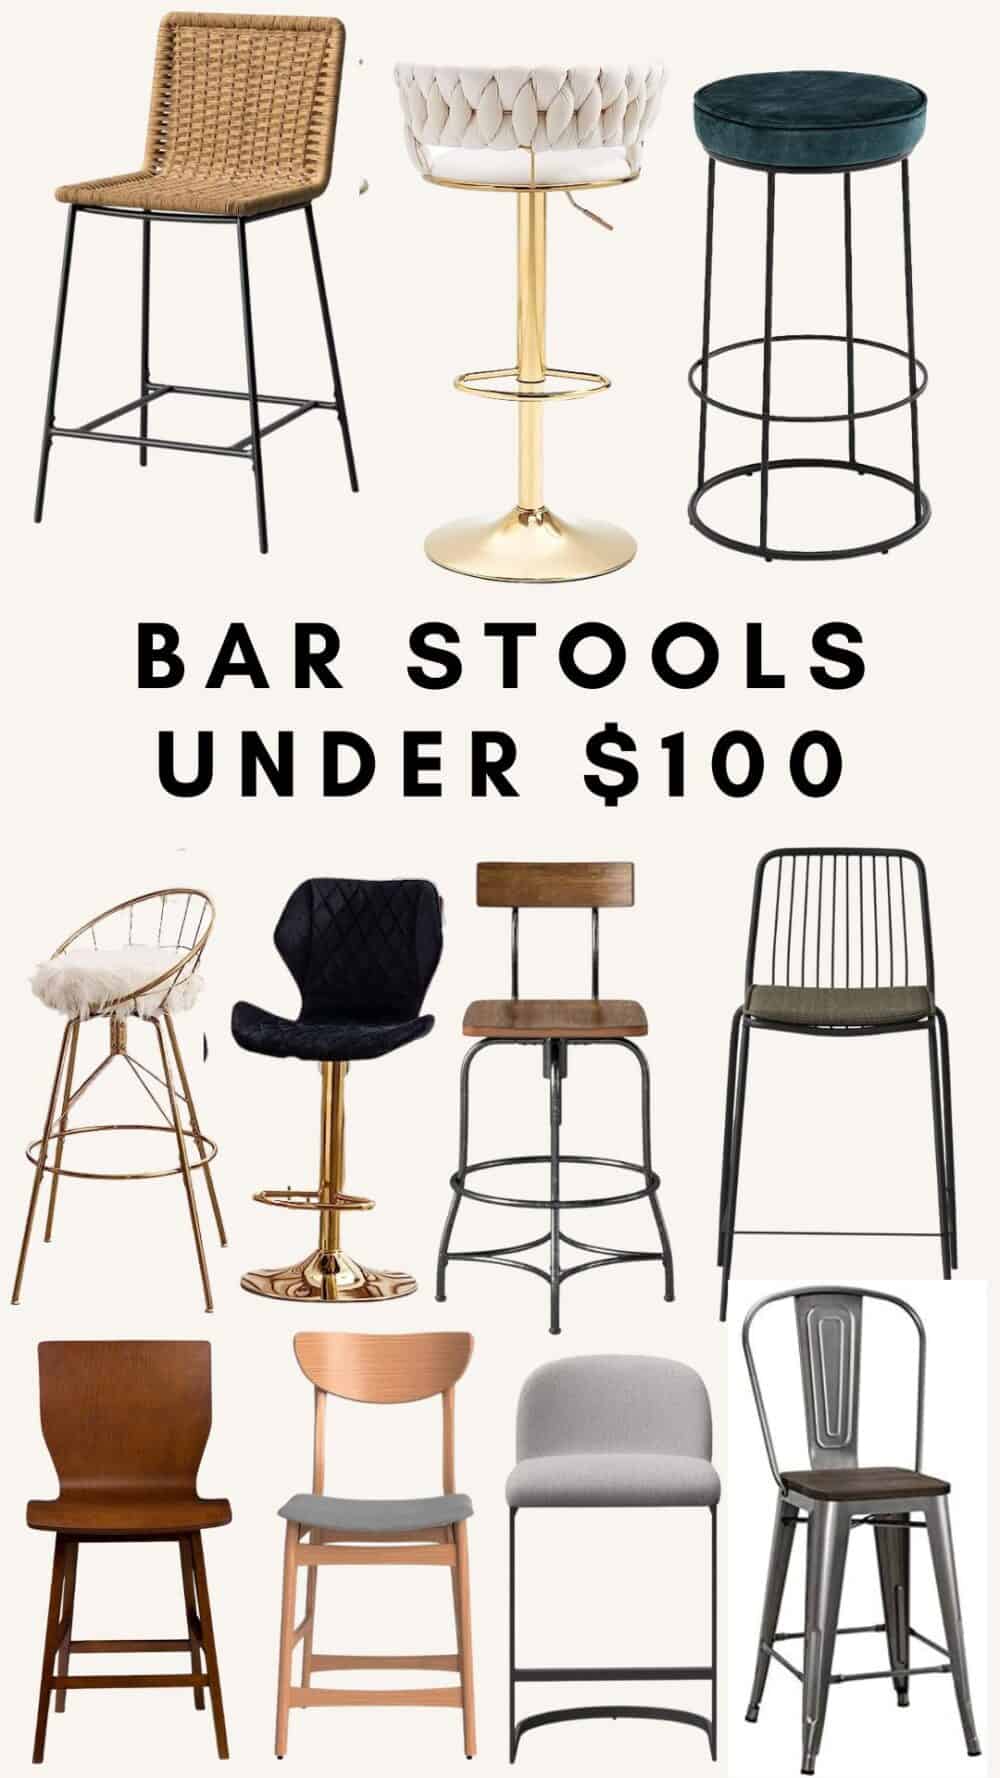 collage of bar stools under $100